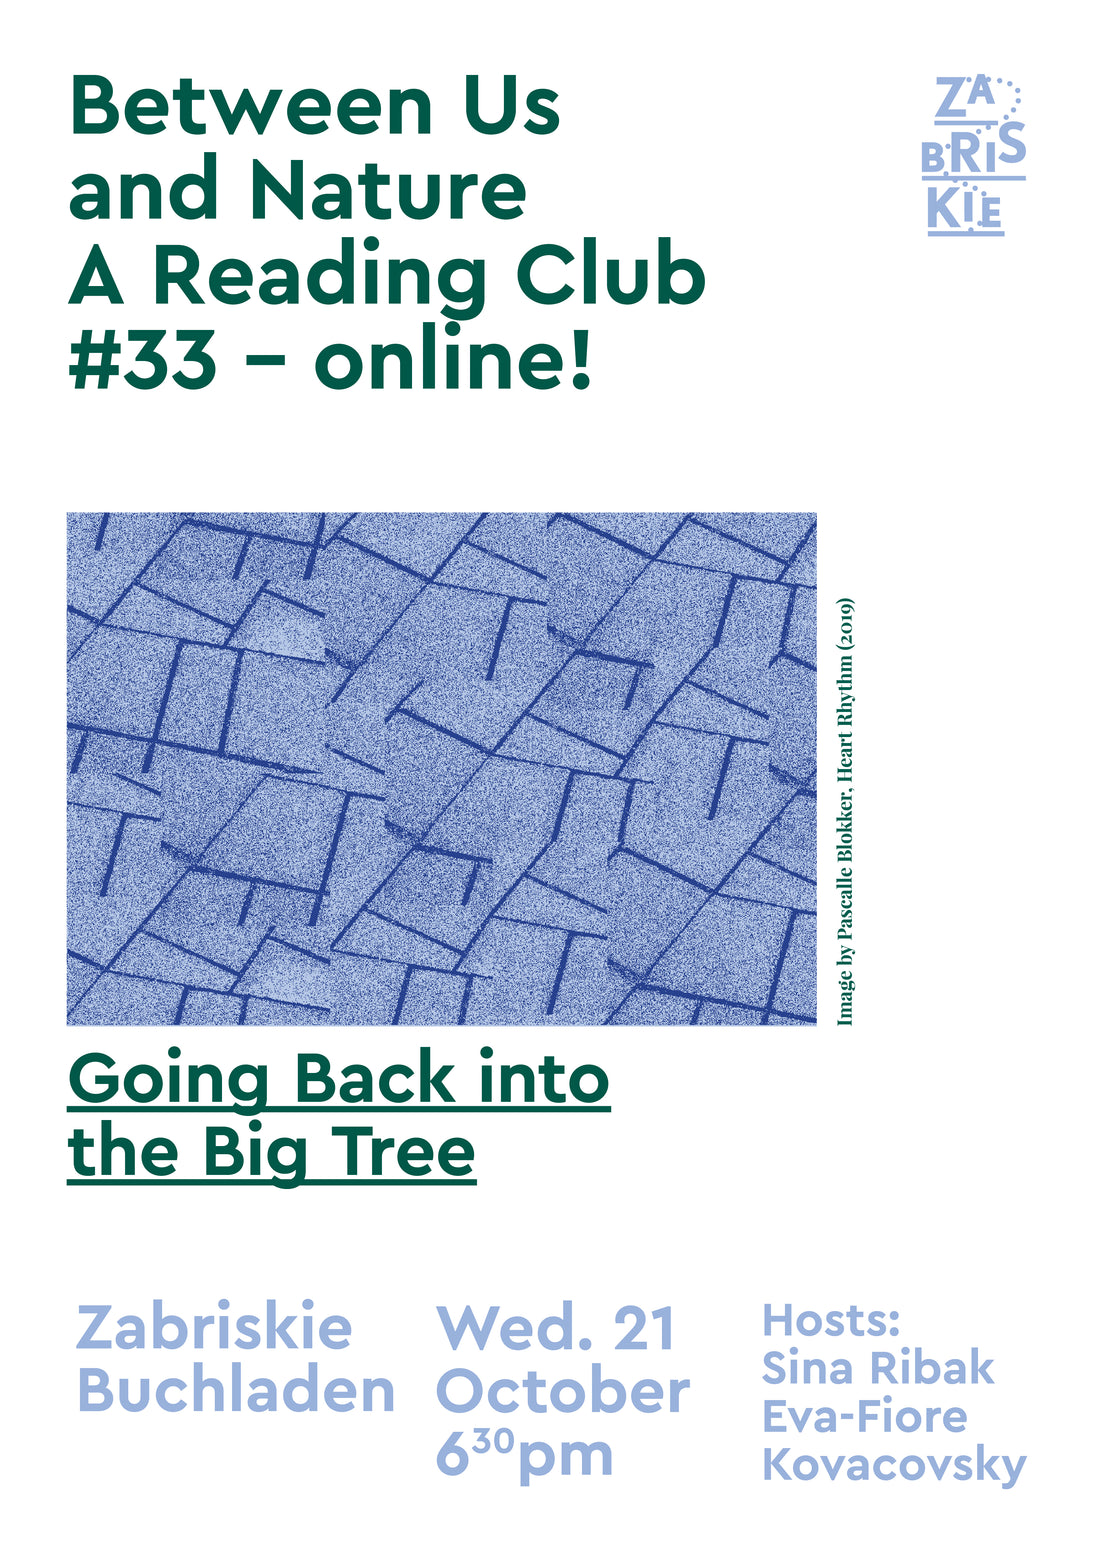 Between Us and Nature – A Reading Club #33 - Going Back Into the Big Tree